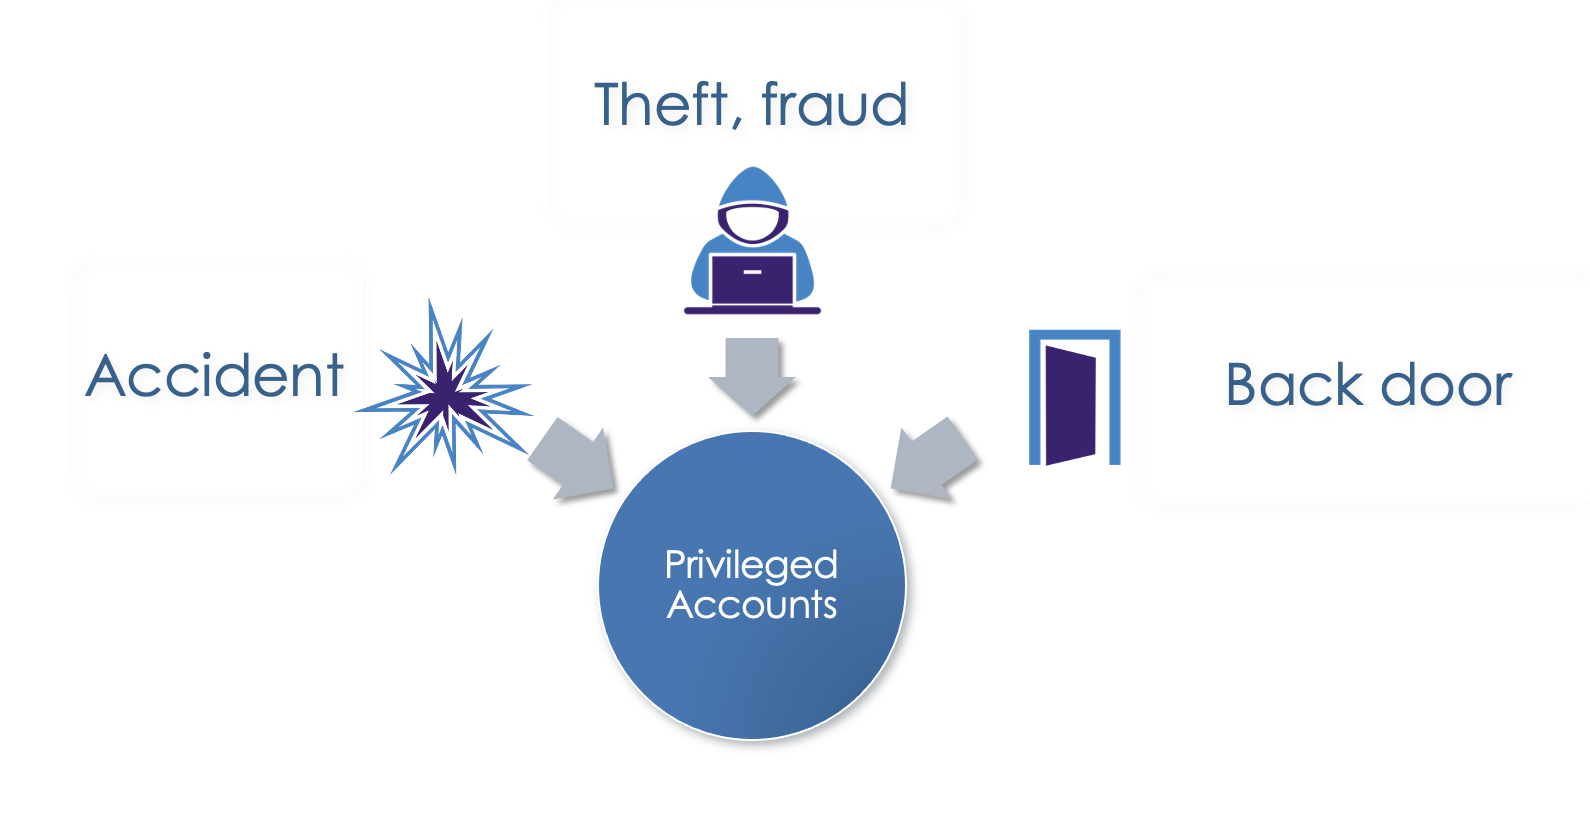 Privileged access and associated risks